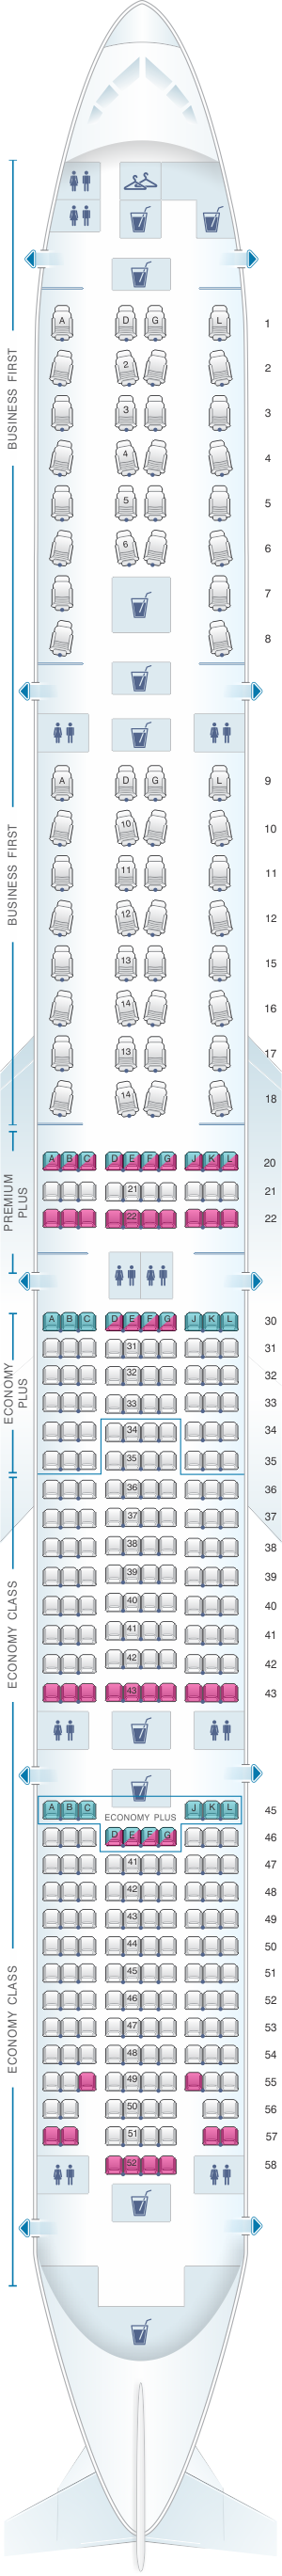 Seat map for United Airlines Boeing B777 300ER